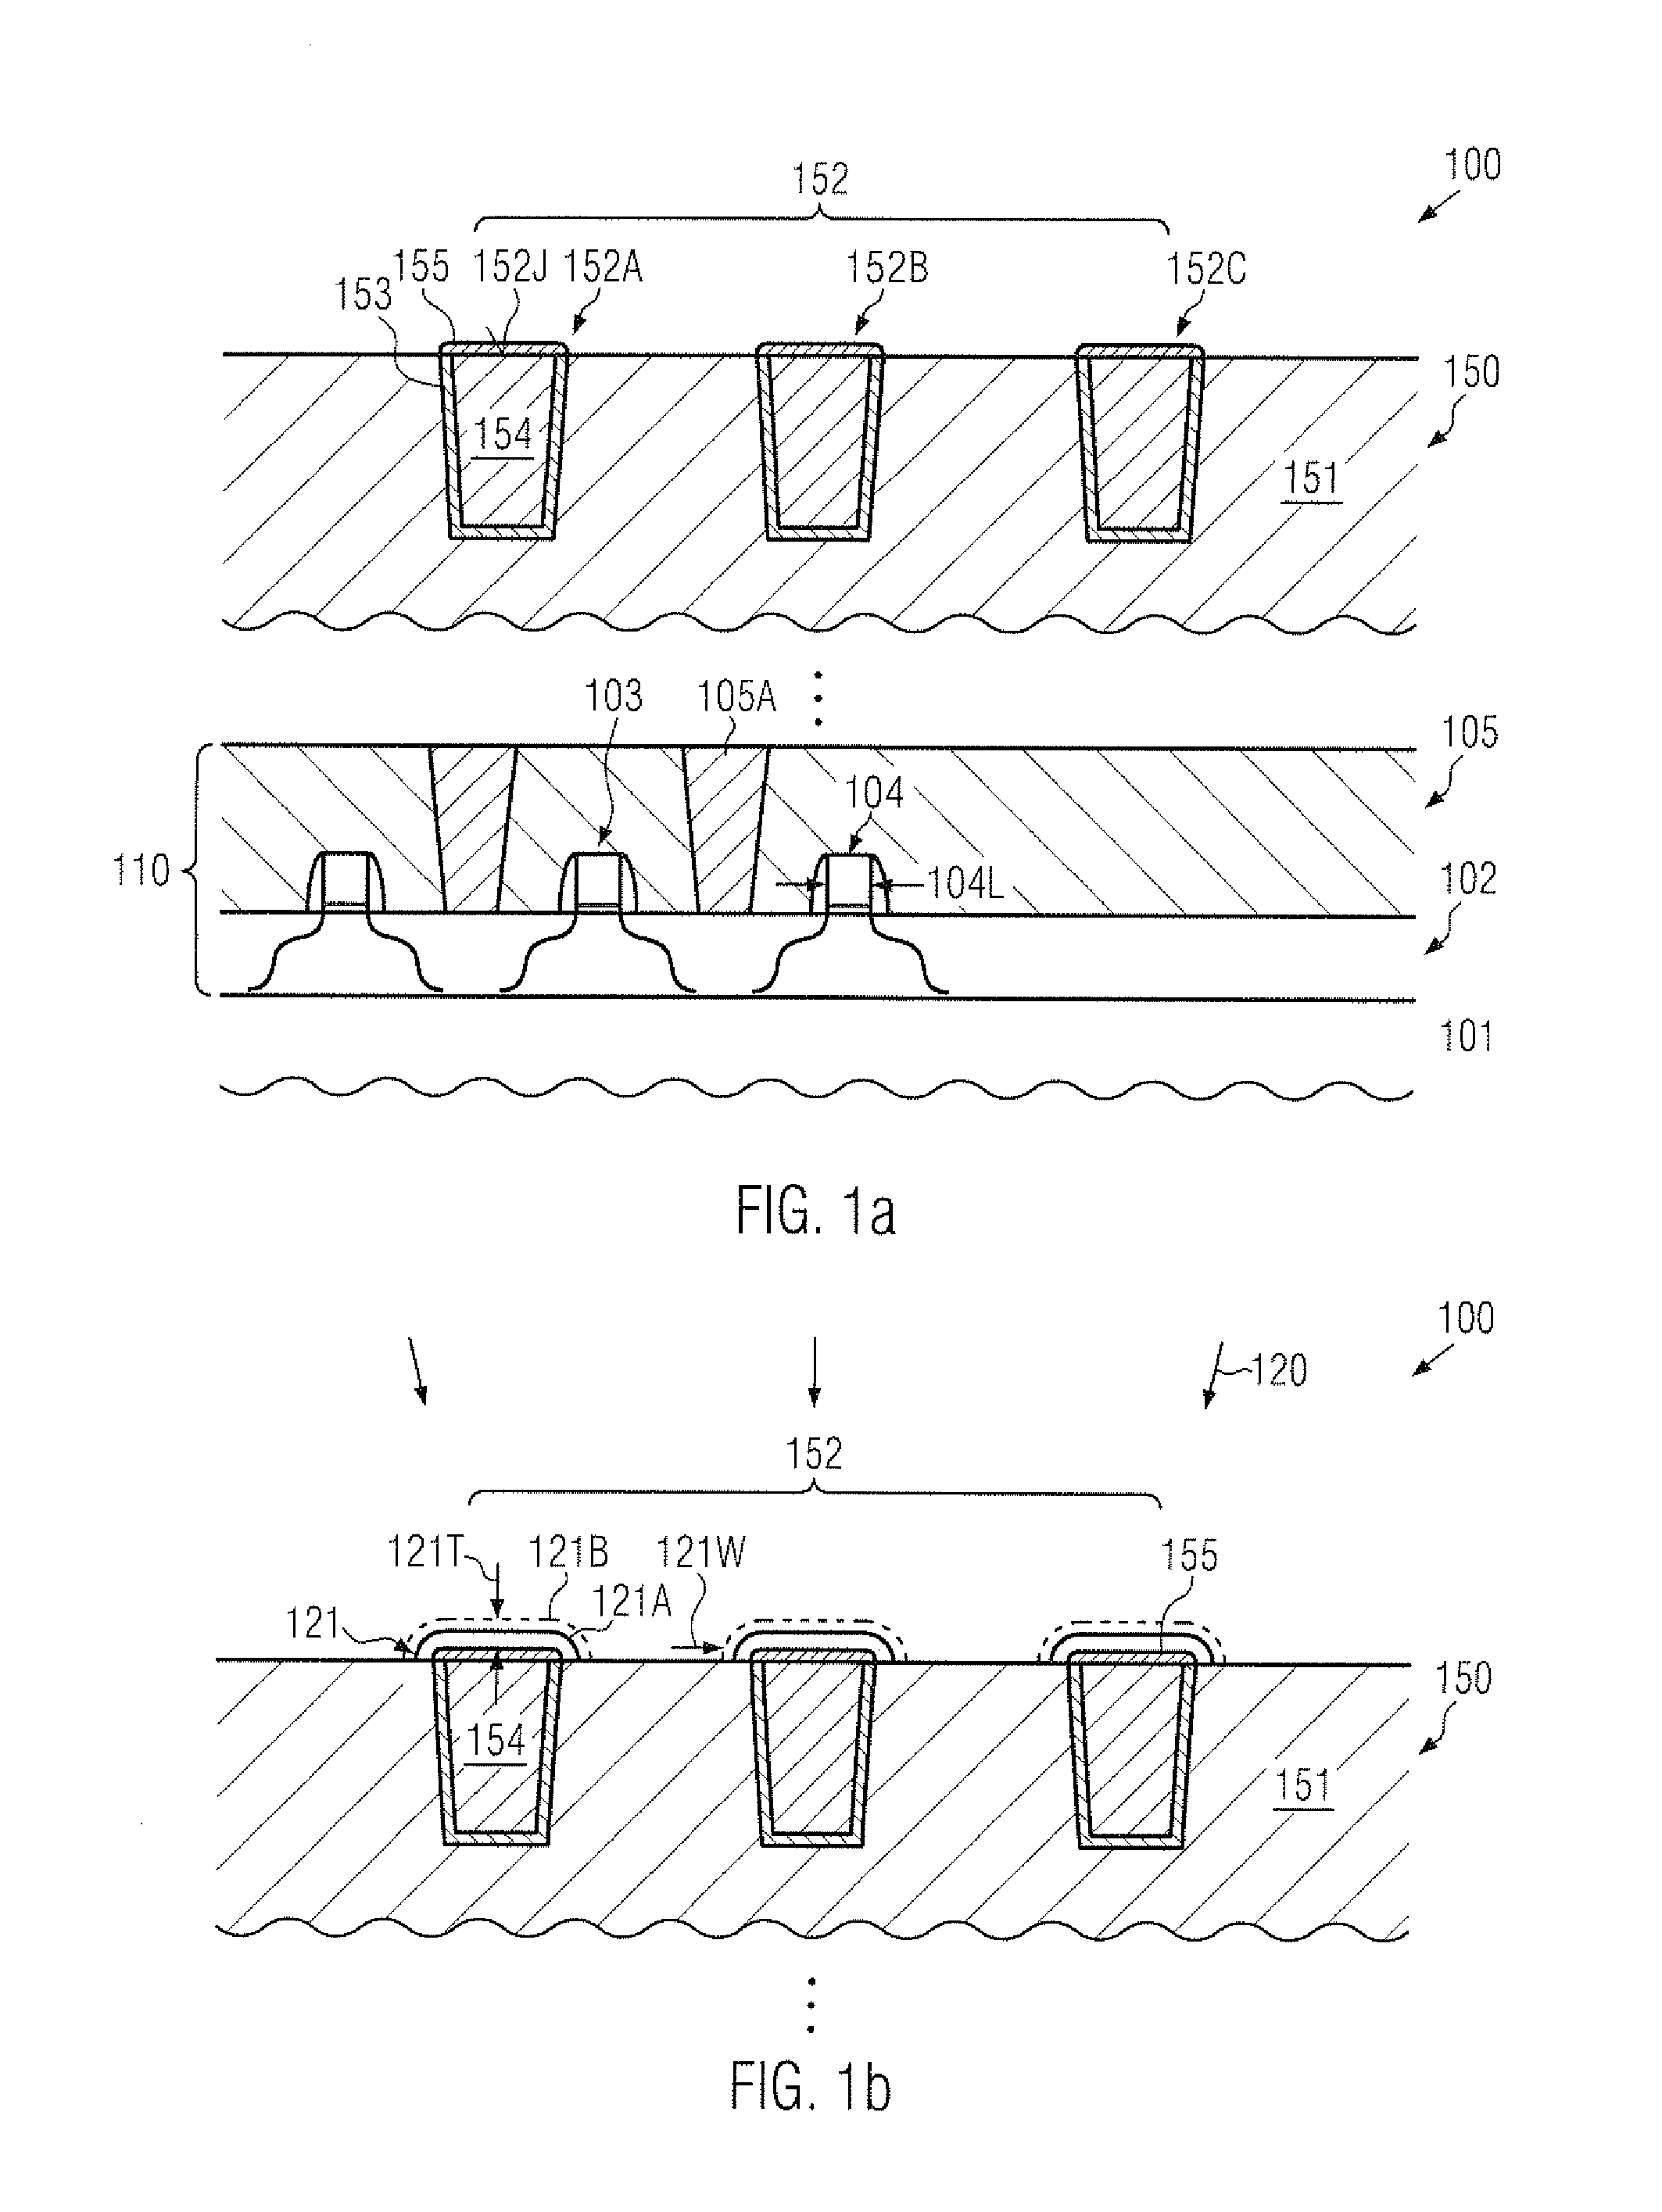 Microstructure device including a metallization structure with self-aligned air gaps between closely spaced metal lines